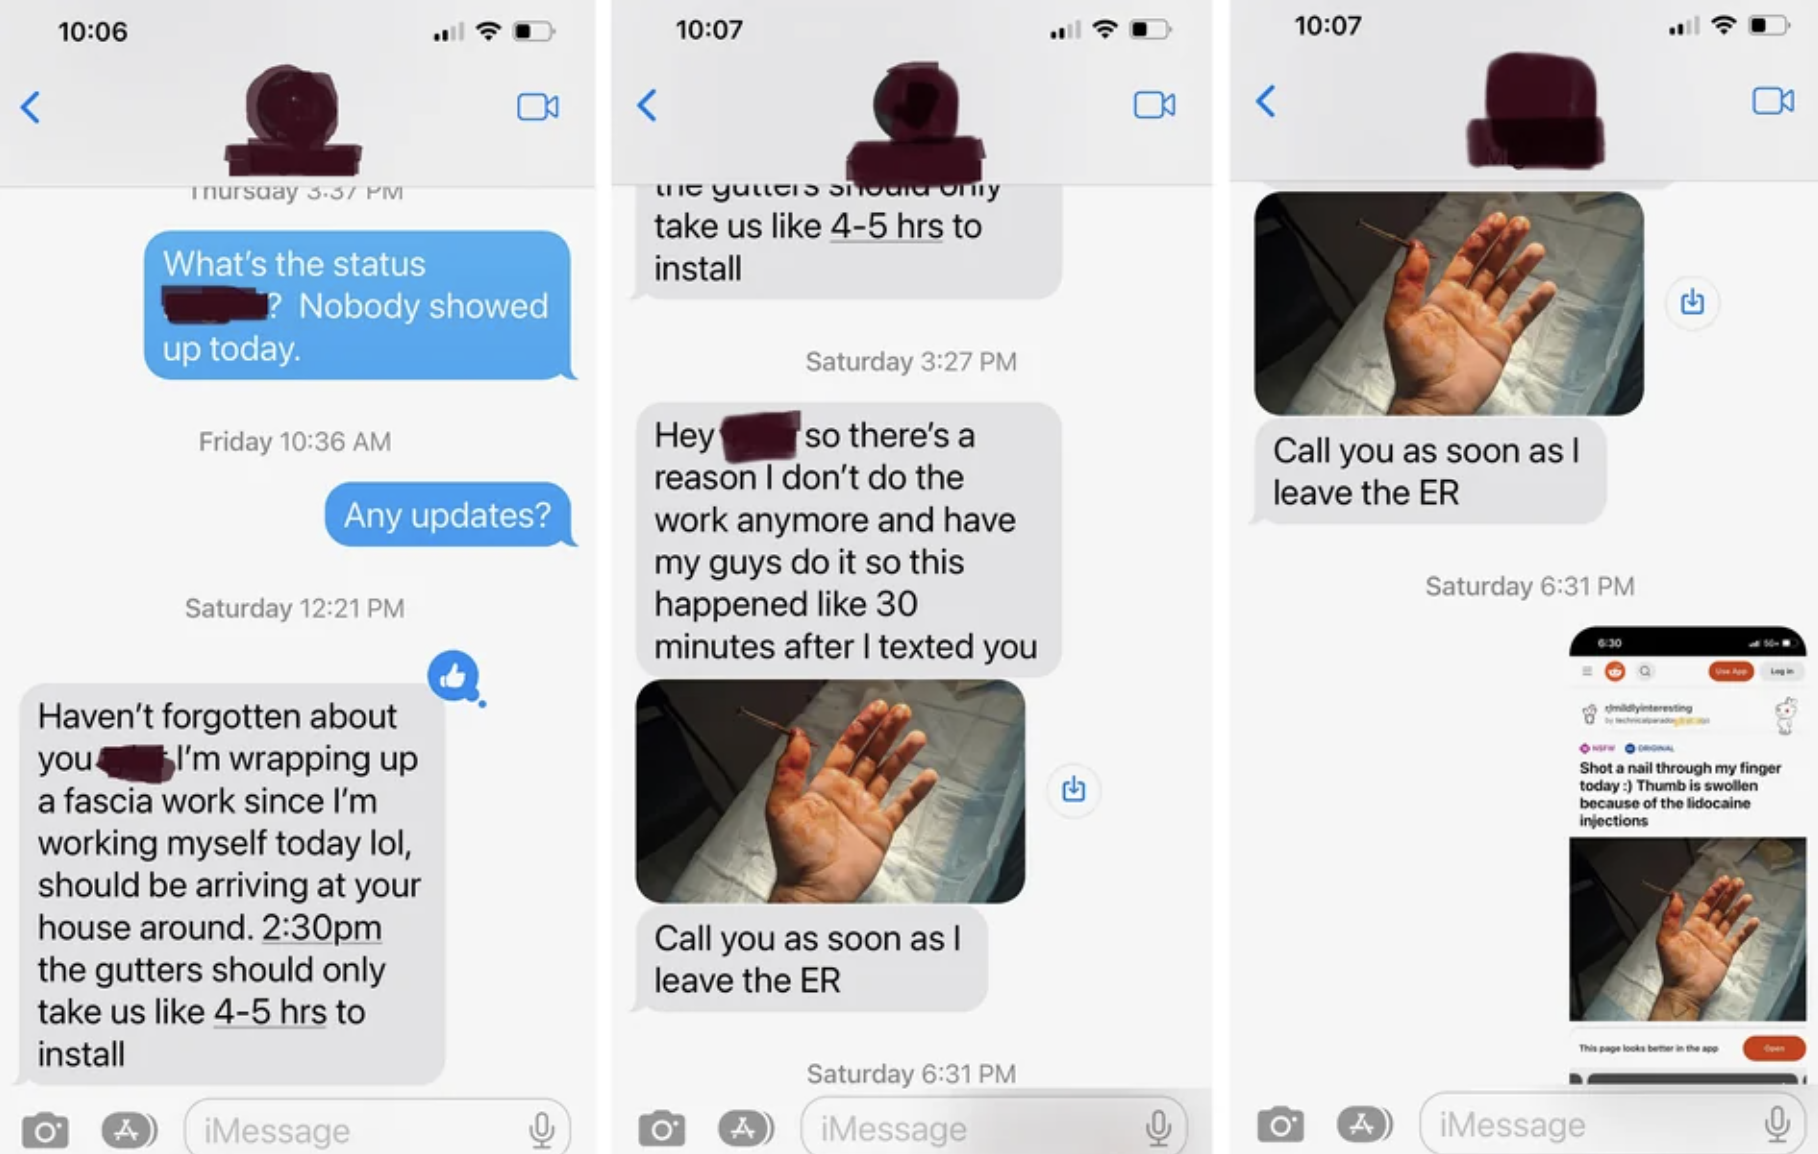 Text message exchange showing someone&#x27;s hand injured, asking to take the day off work for recovery